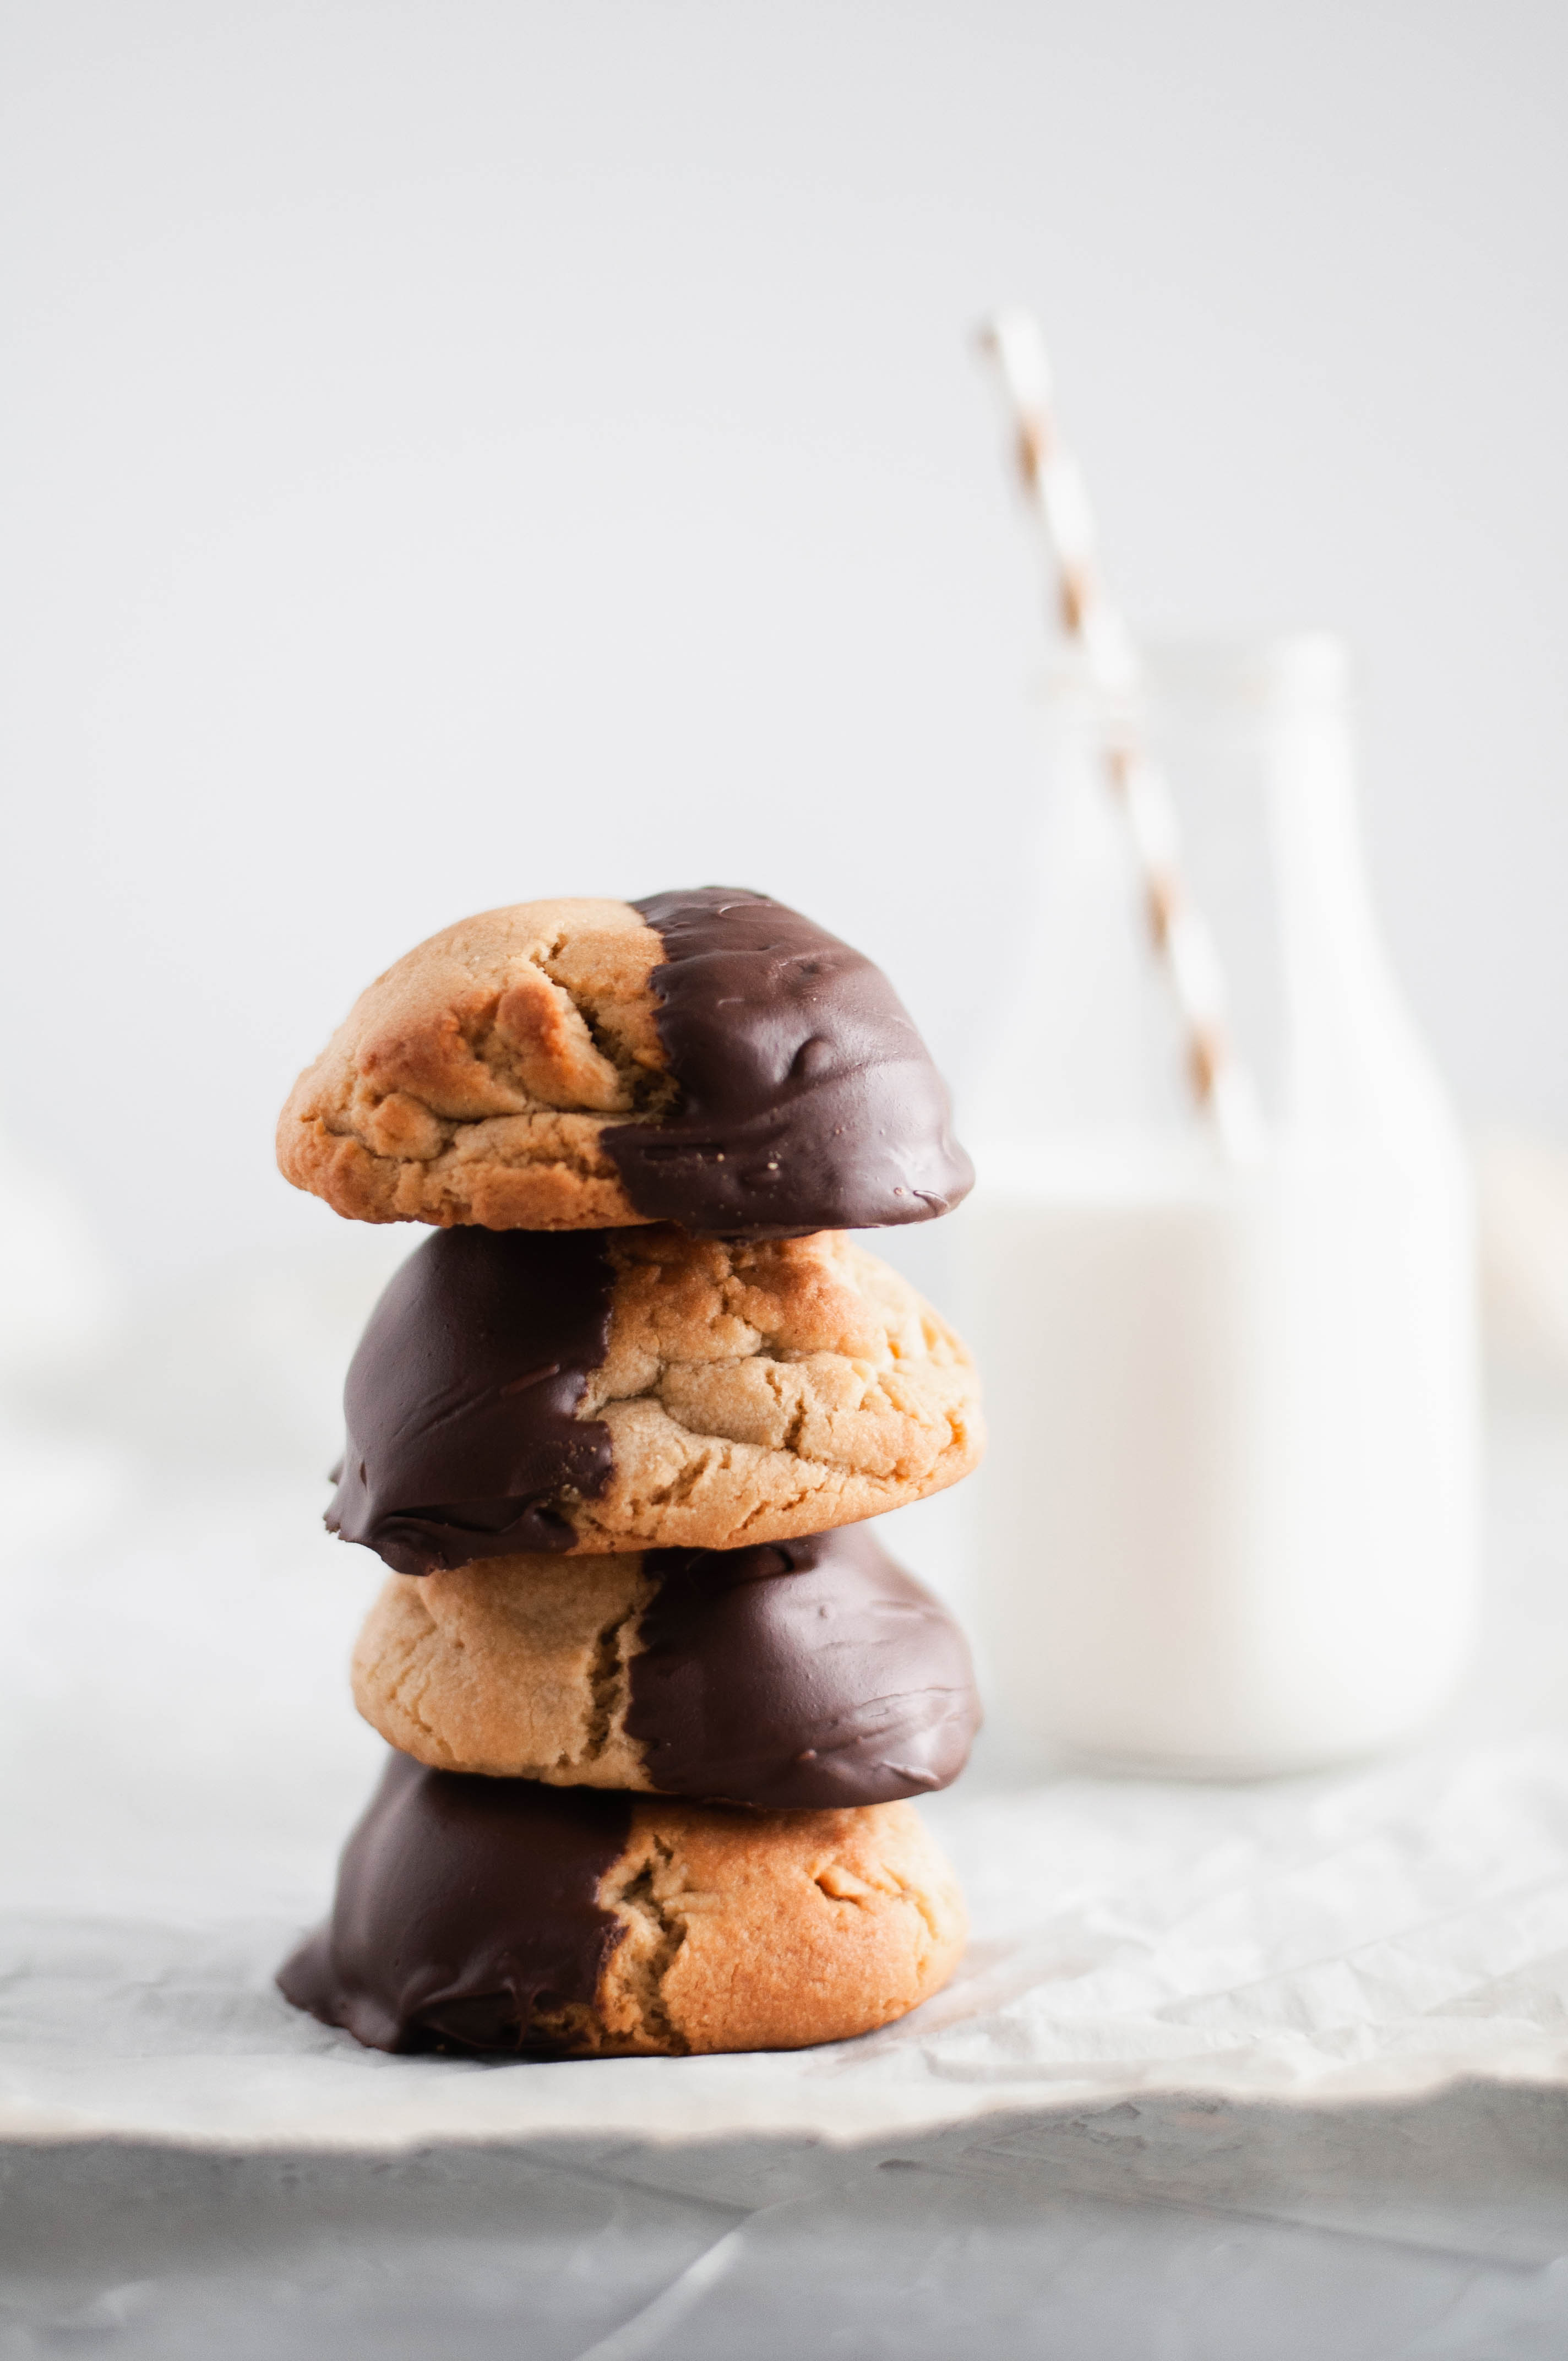 These giant Chocolate Peanut Butter Cookies are perfect for your Christmas cookie baking. Rich, chewy peanut butter cookies dipped in melted chocolate.